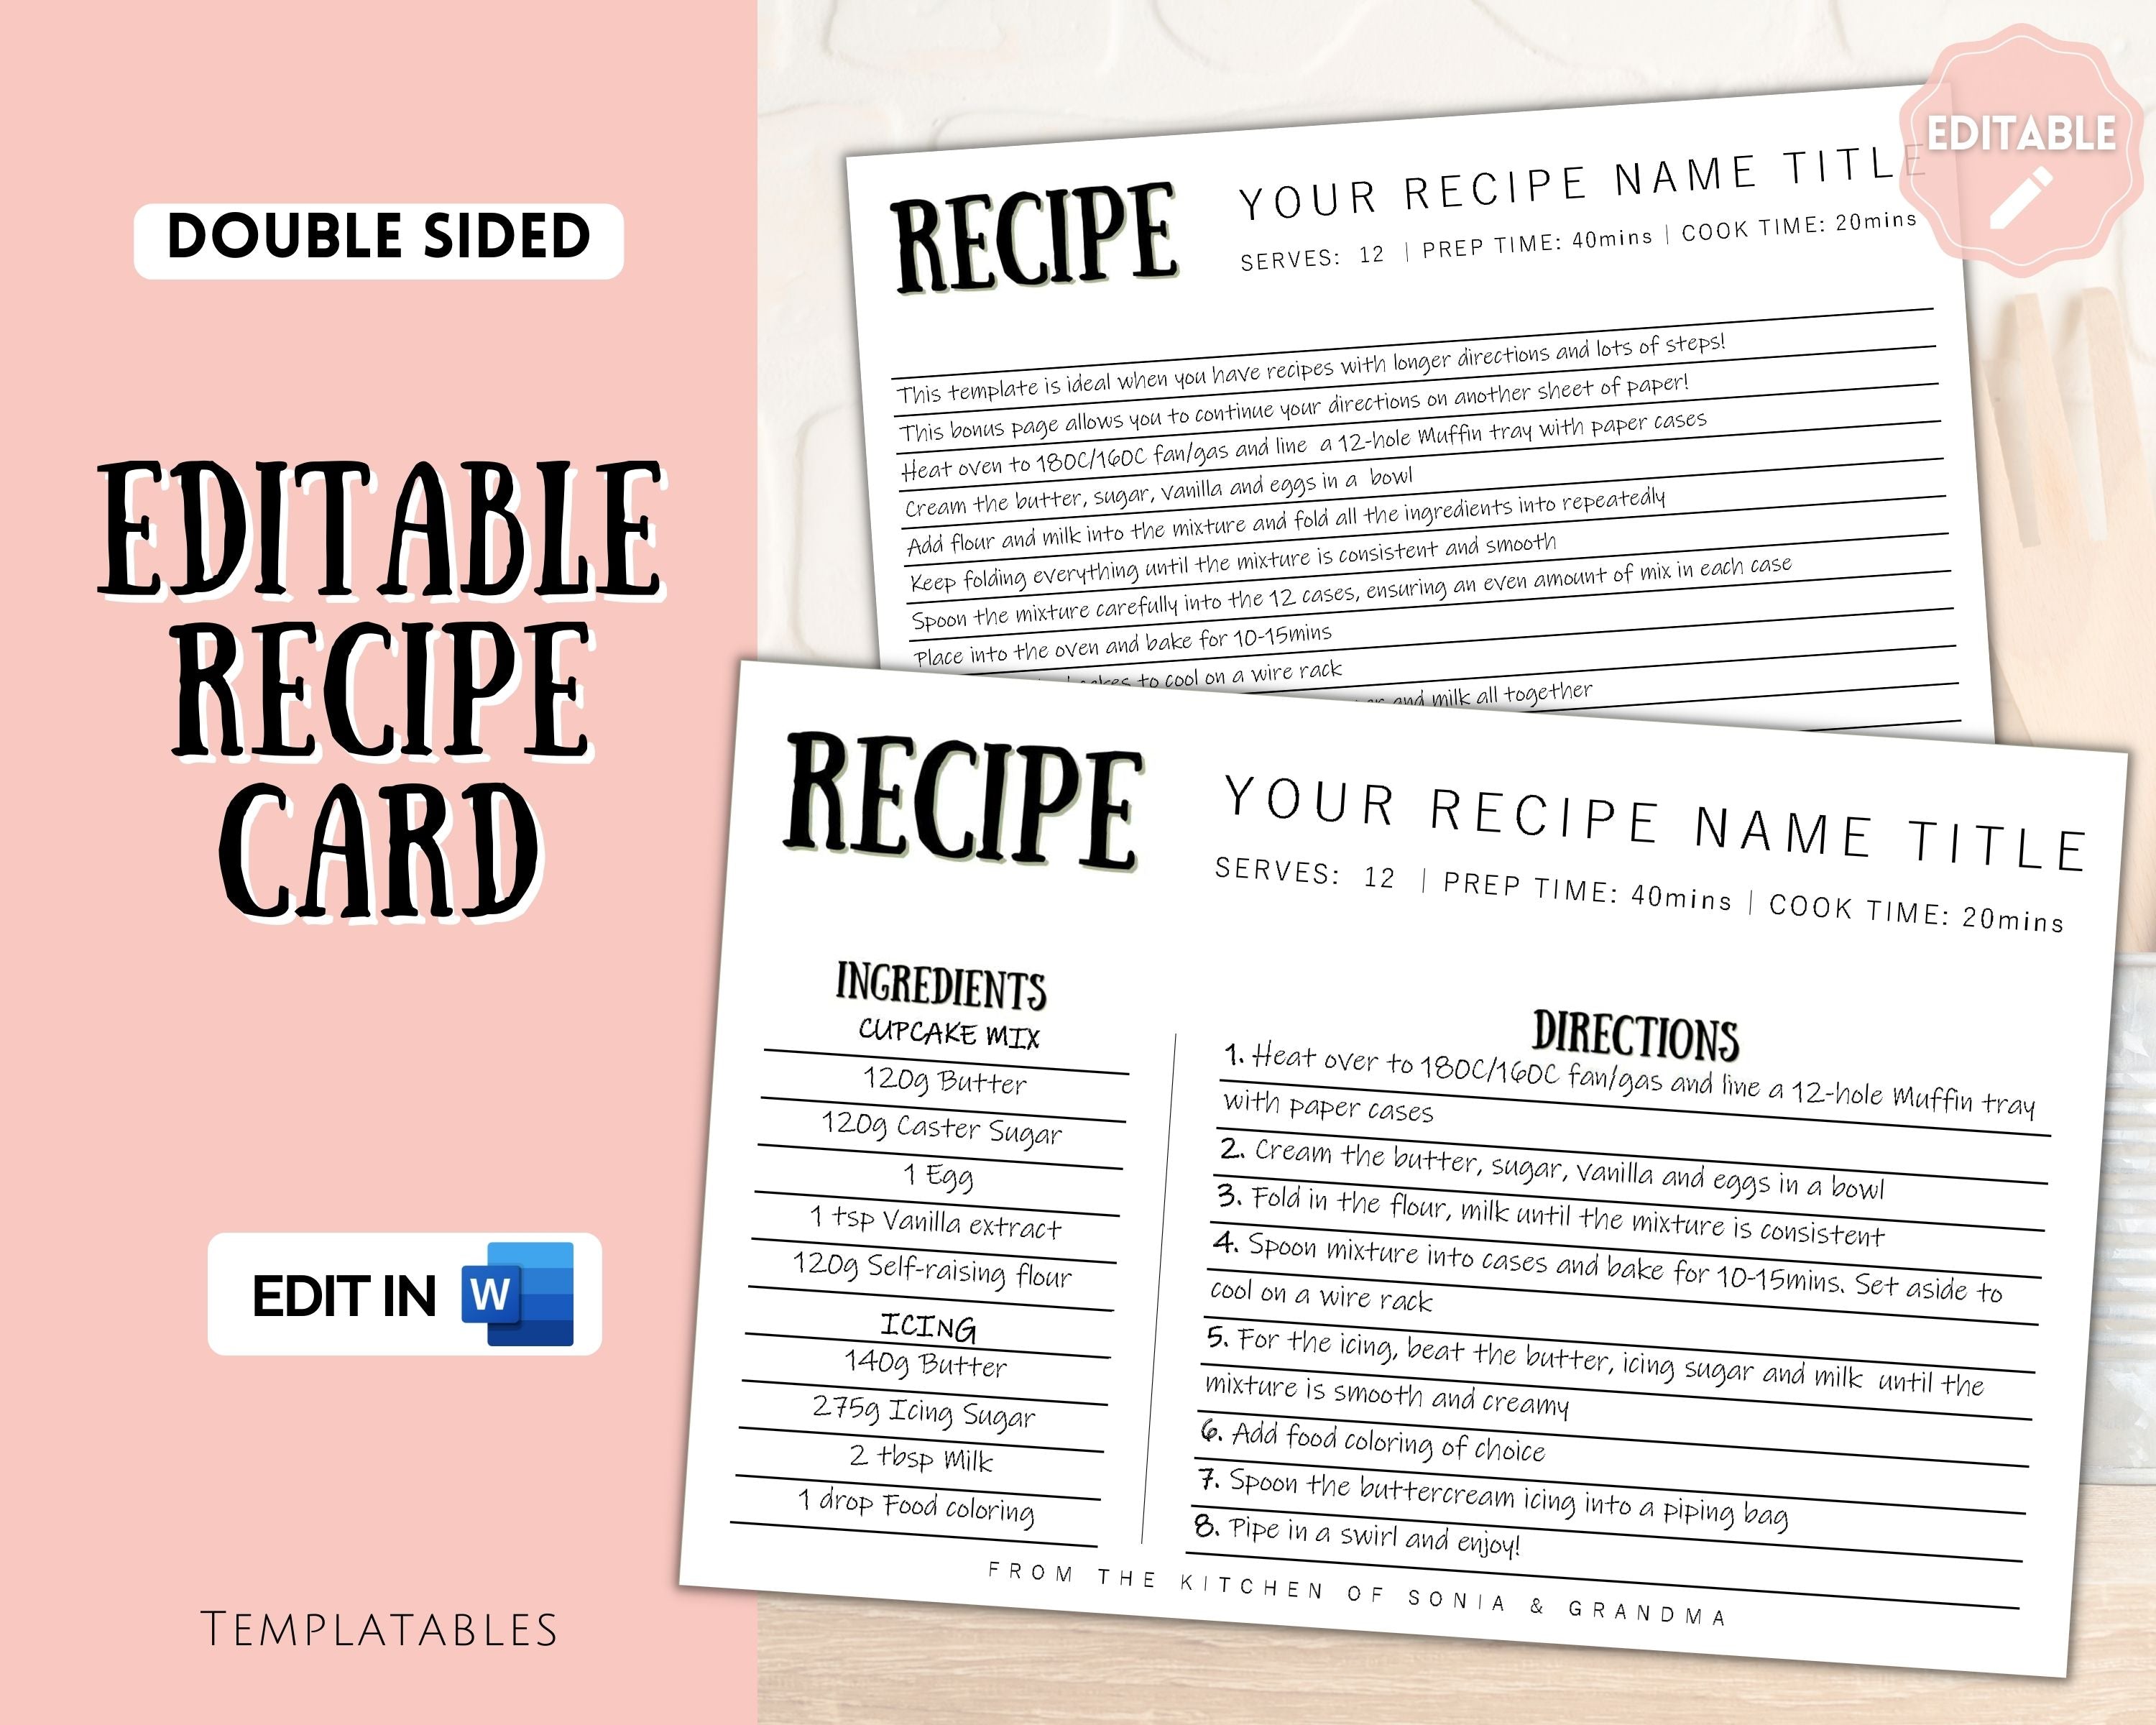 Recipe Cards 3X5 Inches Blank Double Sided, 50 Count (Modern Minimal)